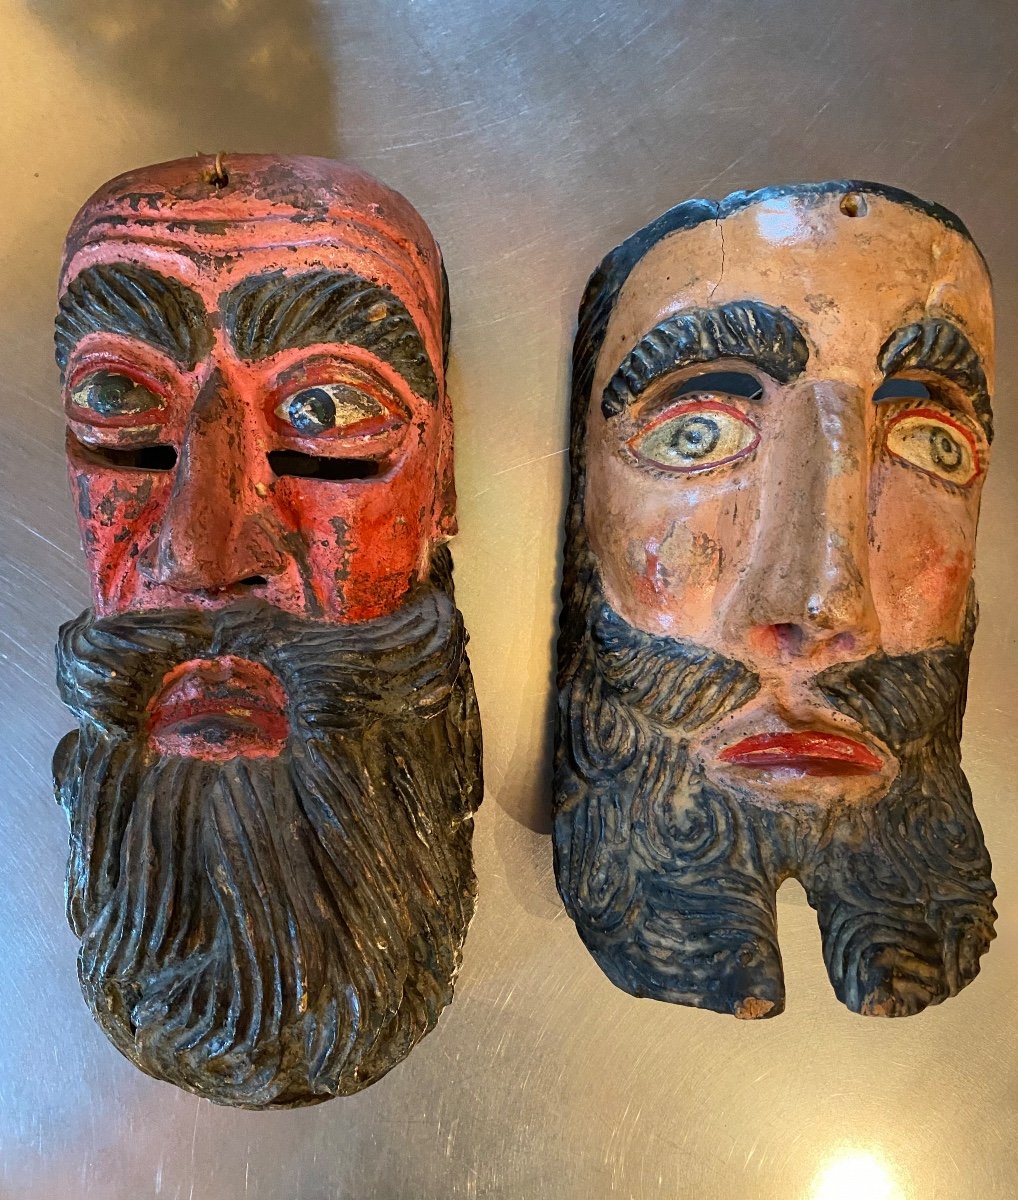 Popular Art From Mexico Or Guatemala, Two Conquistador Masks Early 20th Century